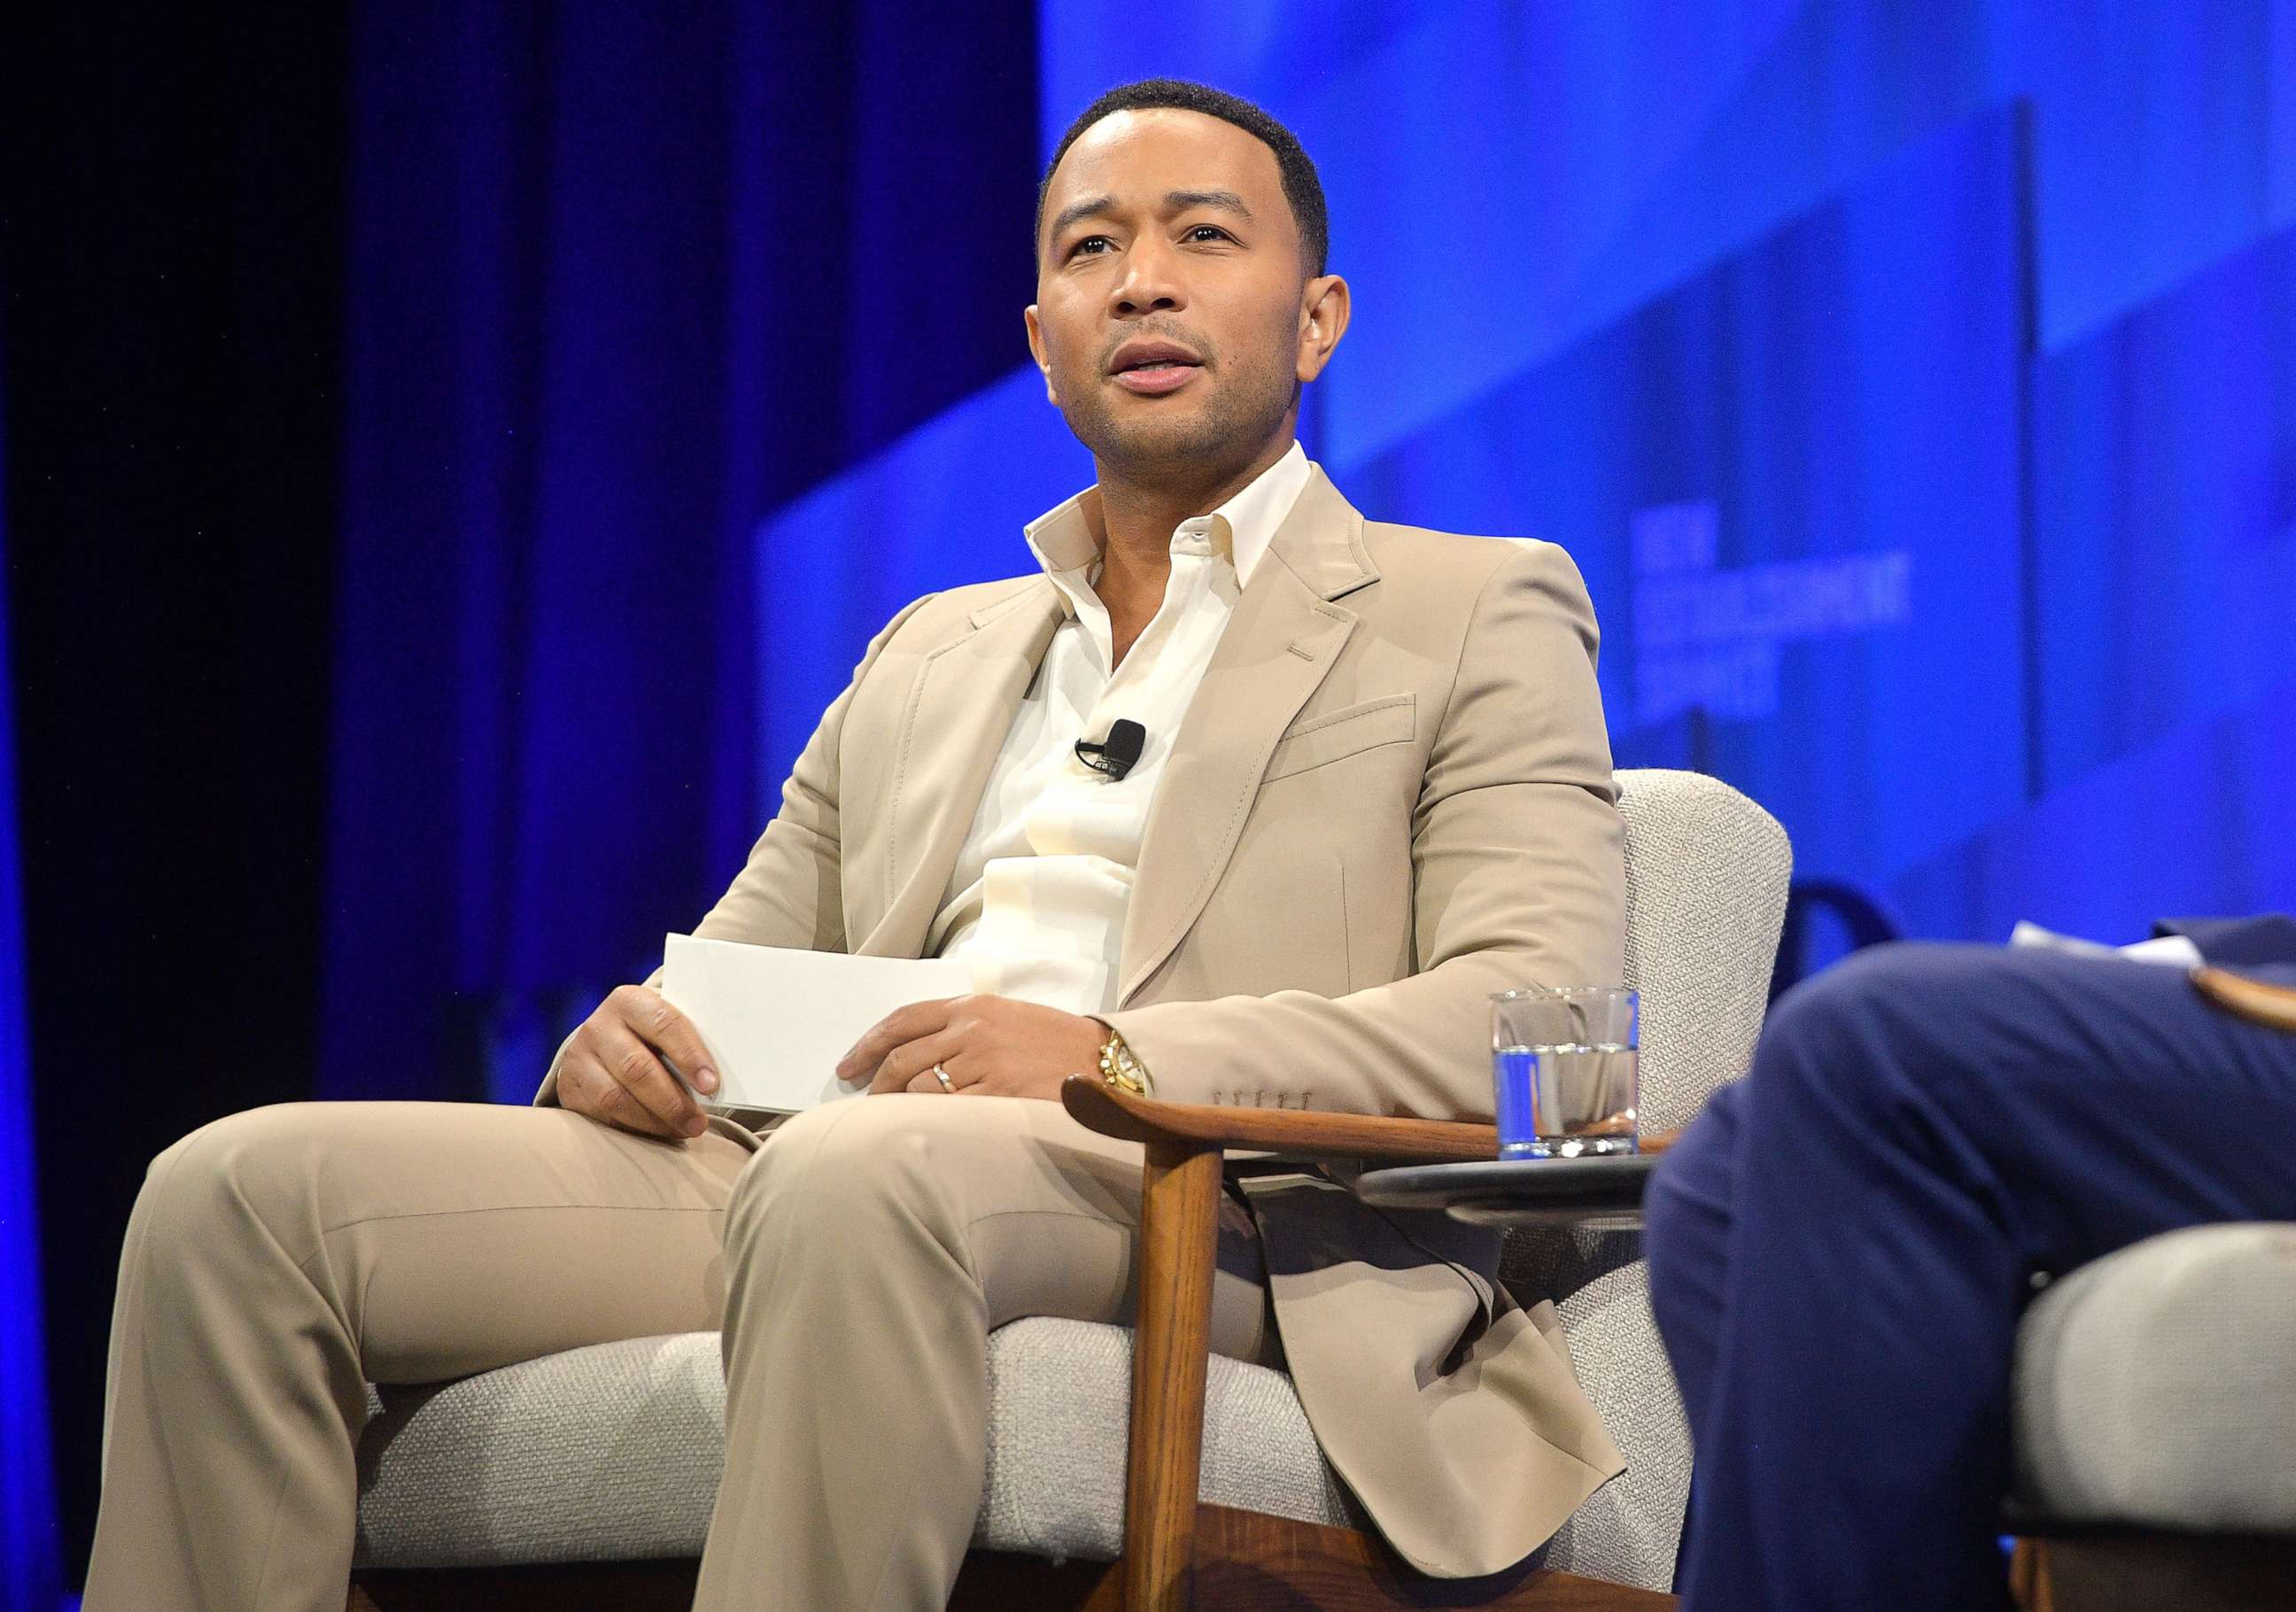 PHOTO: In this Oct. 22, 2019, file photo, John Legend speaks onstage during 'Legend Has It: Activism and Influence in the Age of Trump' at Vanity Fair's 6th Annual New Establishment Summit in Beverly Hills, Calif.